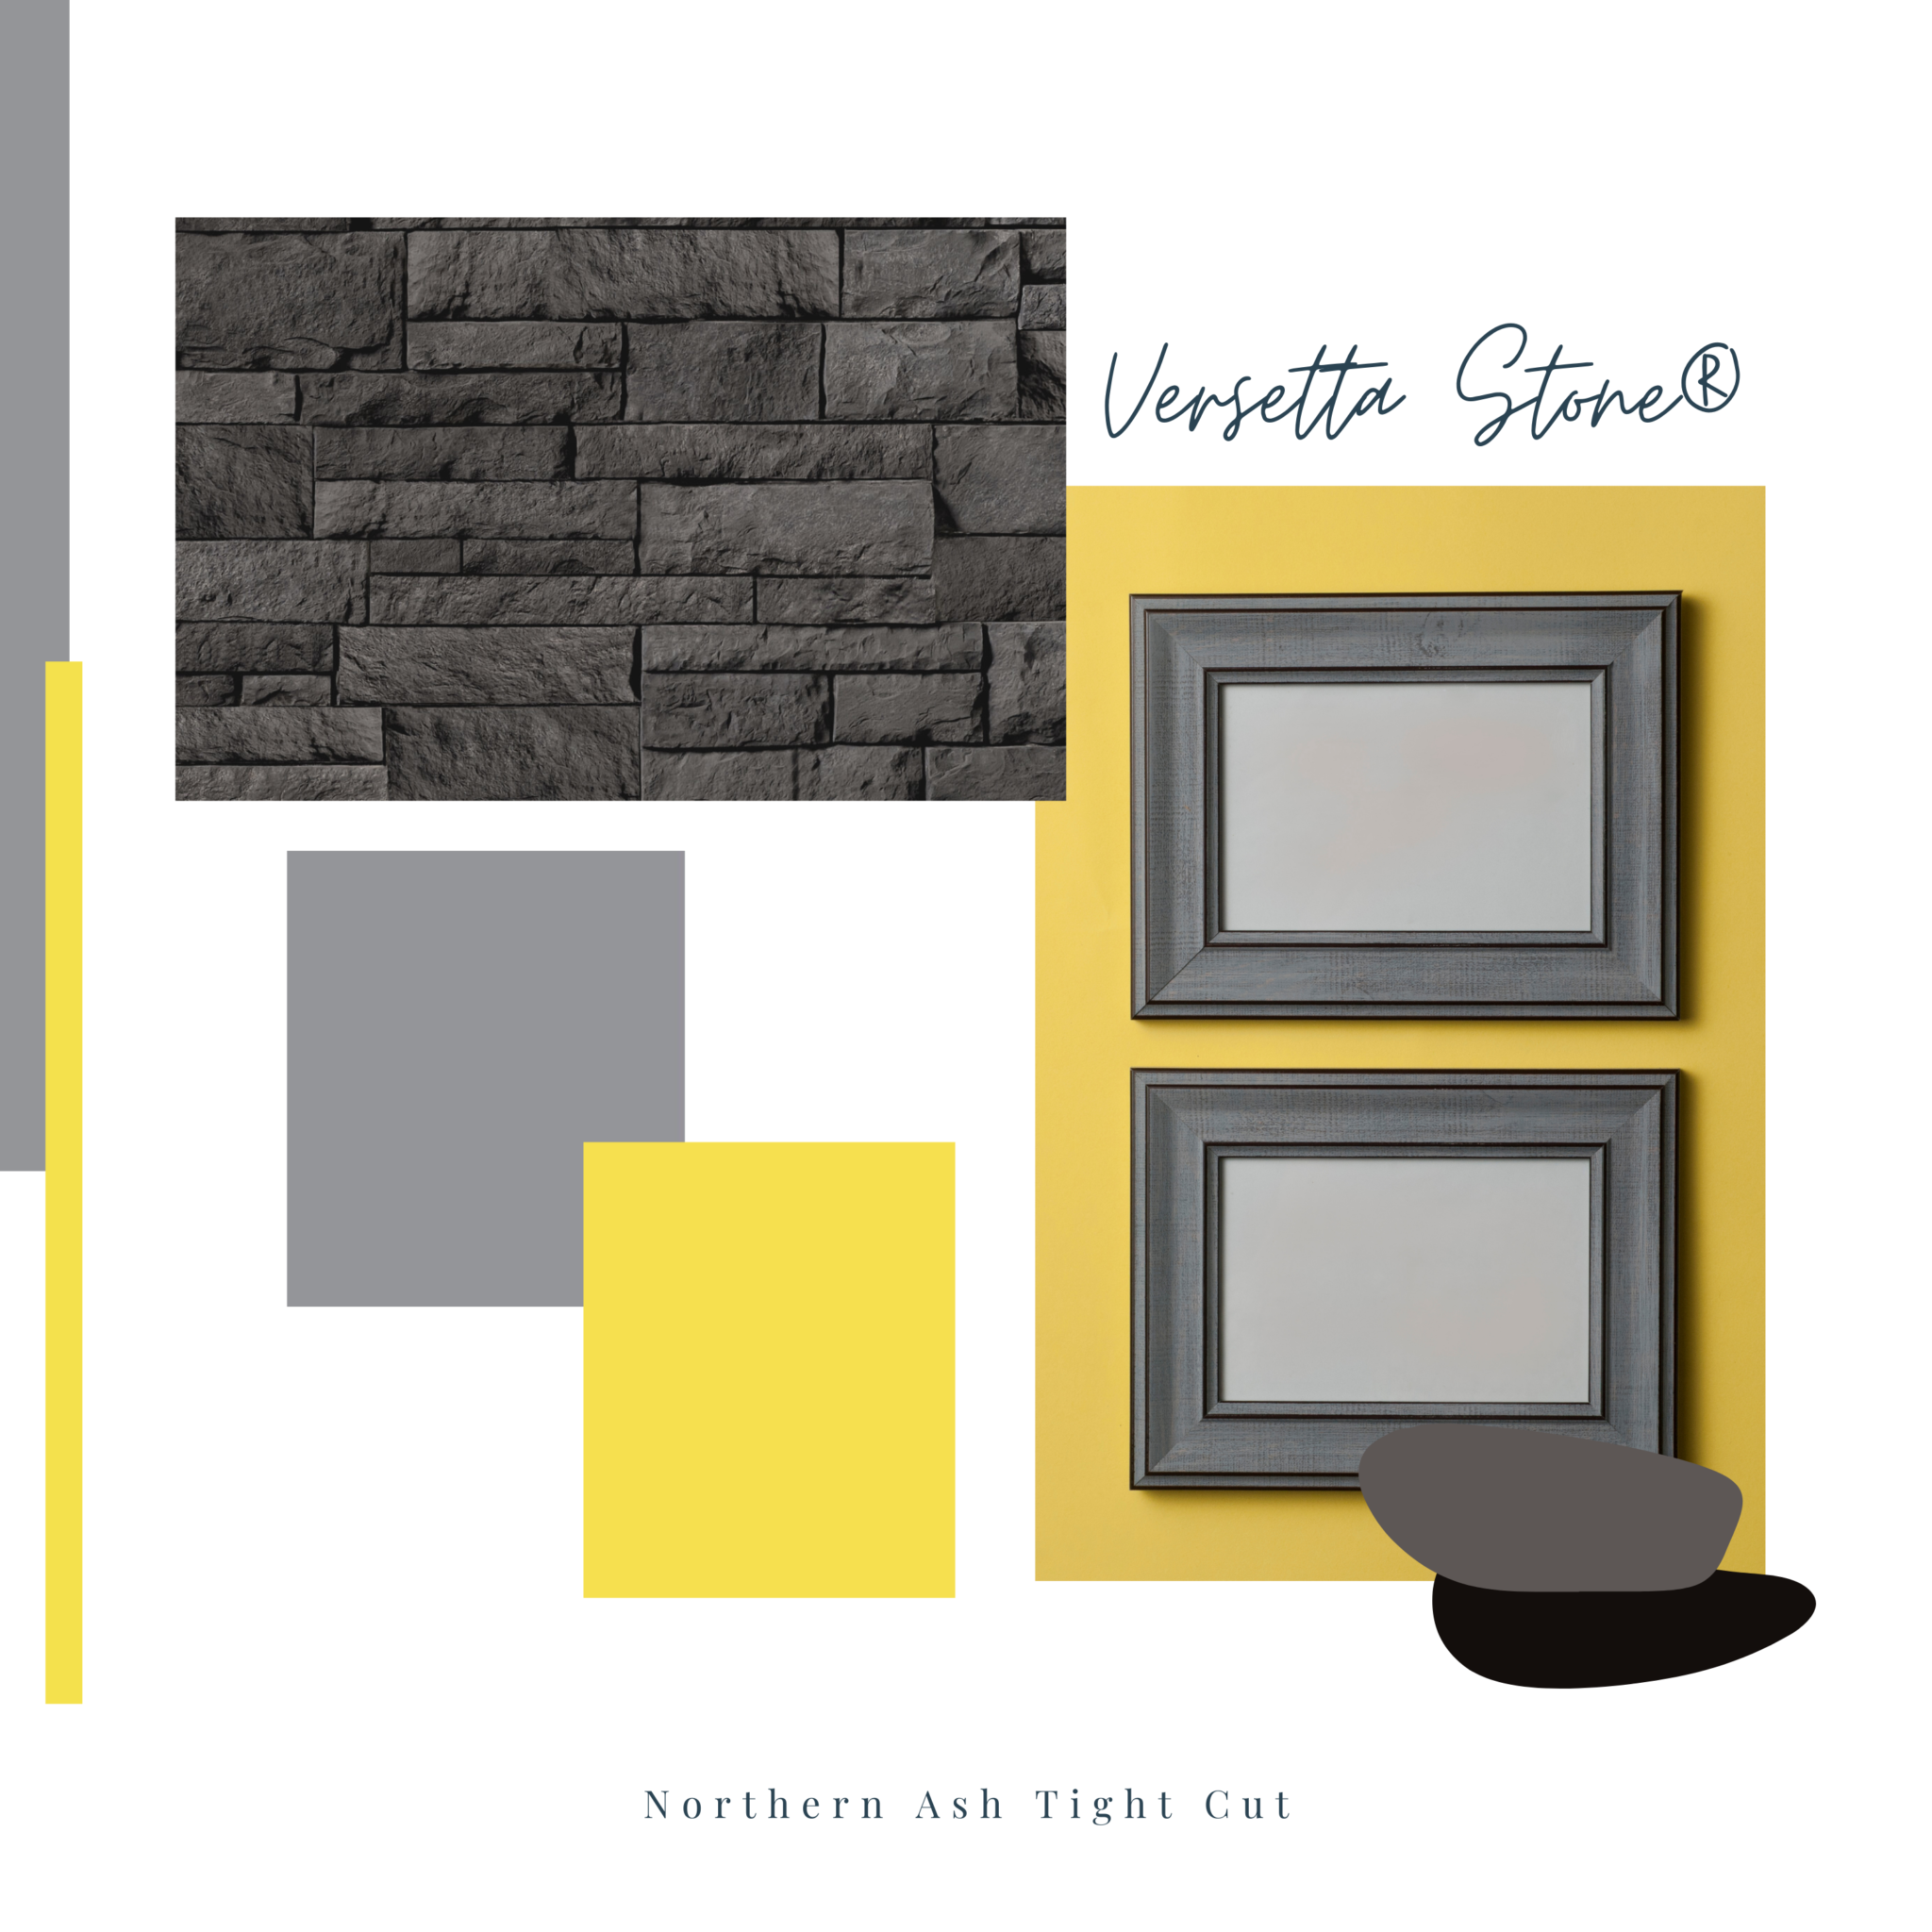 How to Pair 2021's Pantone Colors with our Stone Veneers - Versetta Stone®